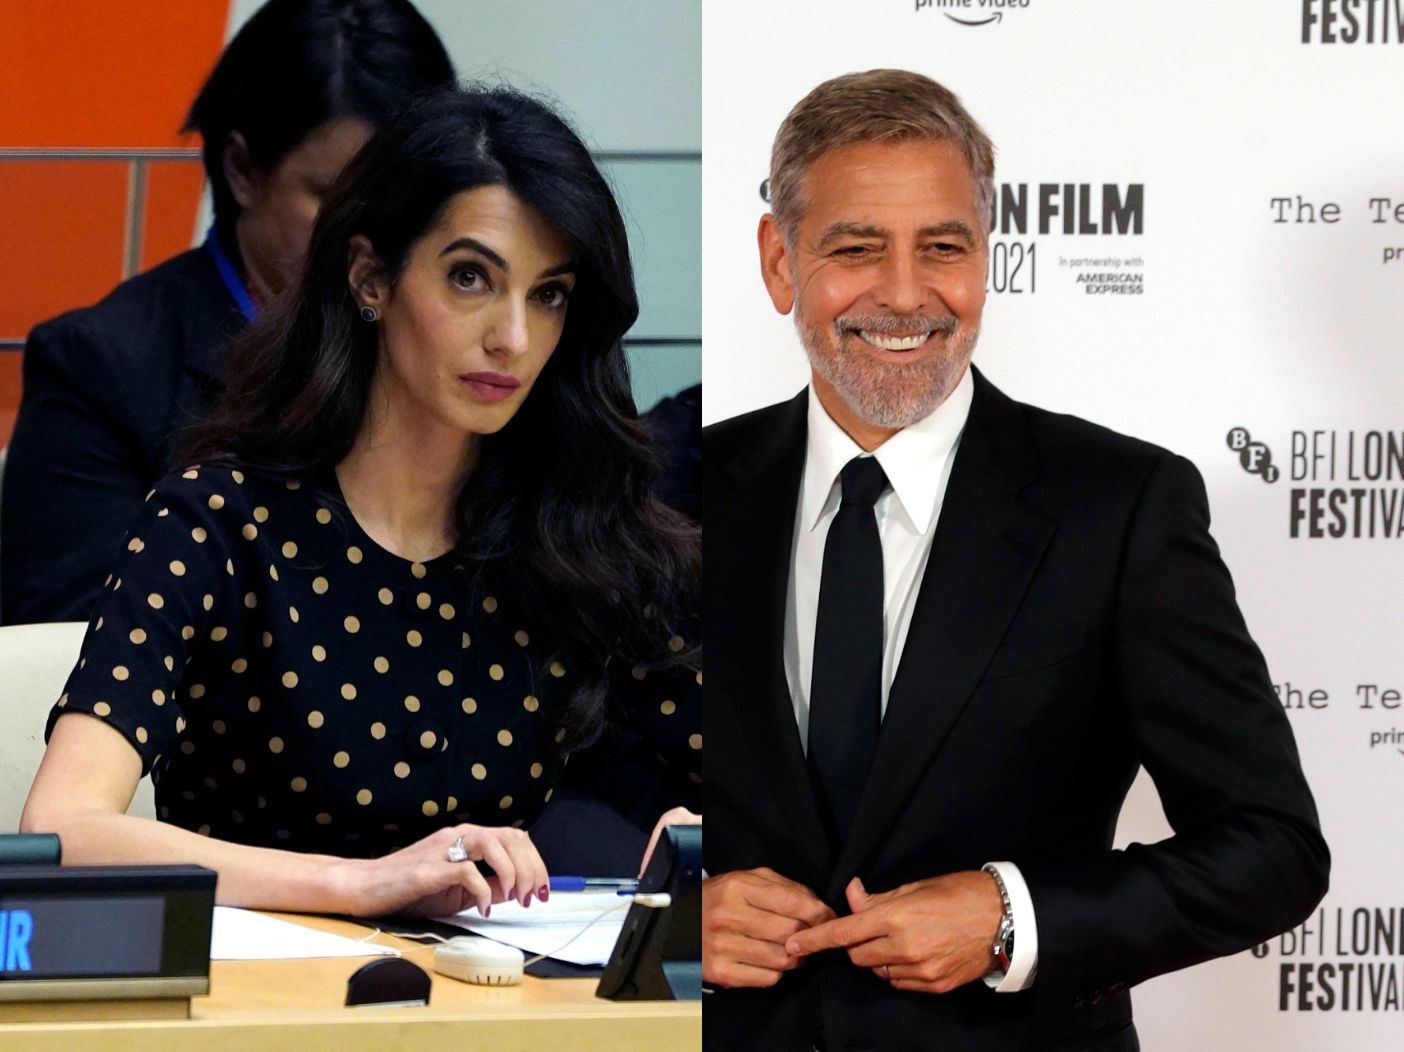 Sketchy Insider: Amal Clooney Apparently Ordering George to Stop Flirting with Co-Stars Or Else